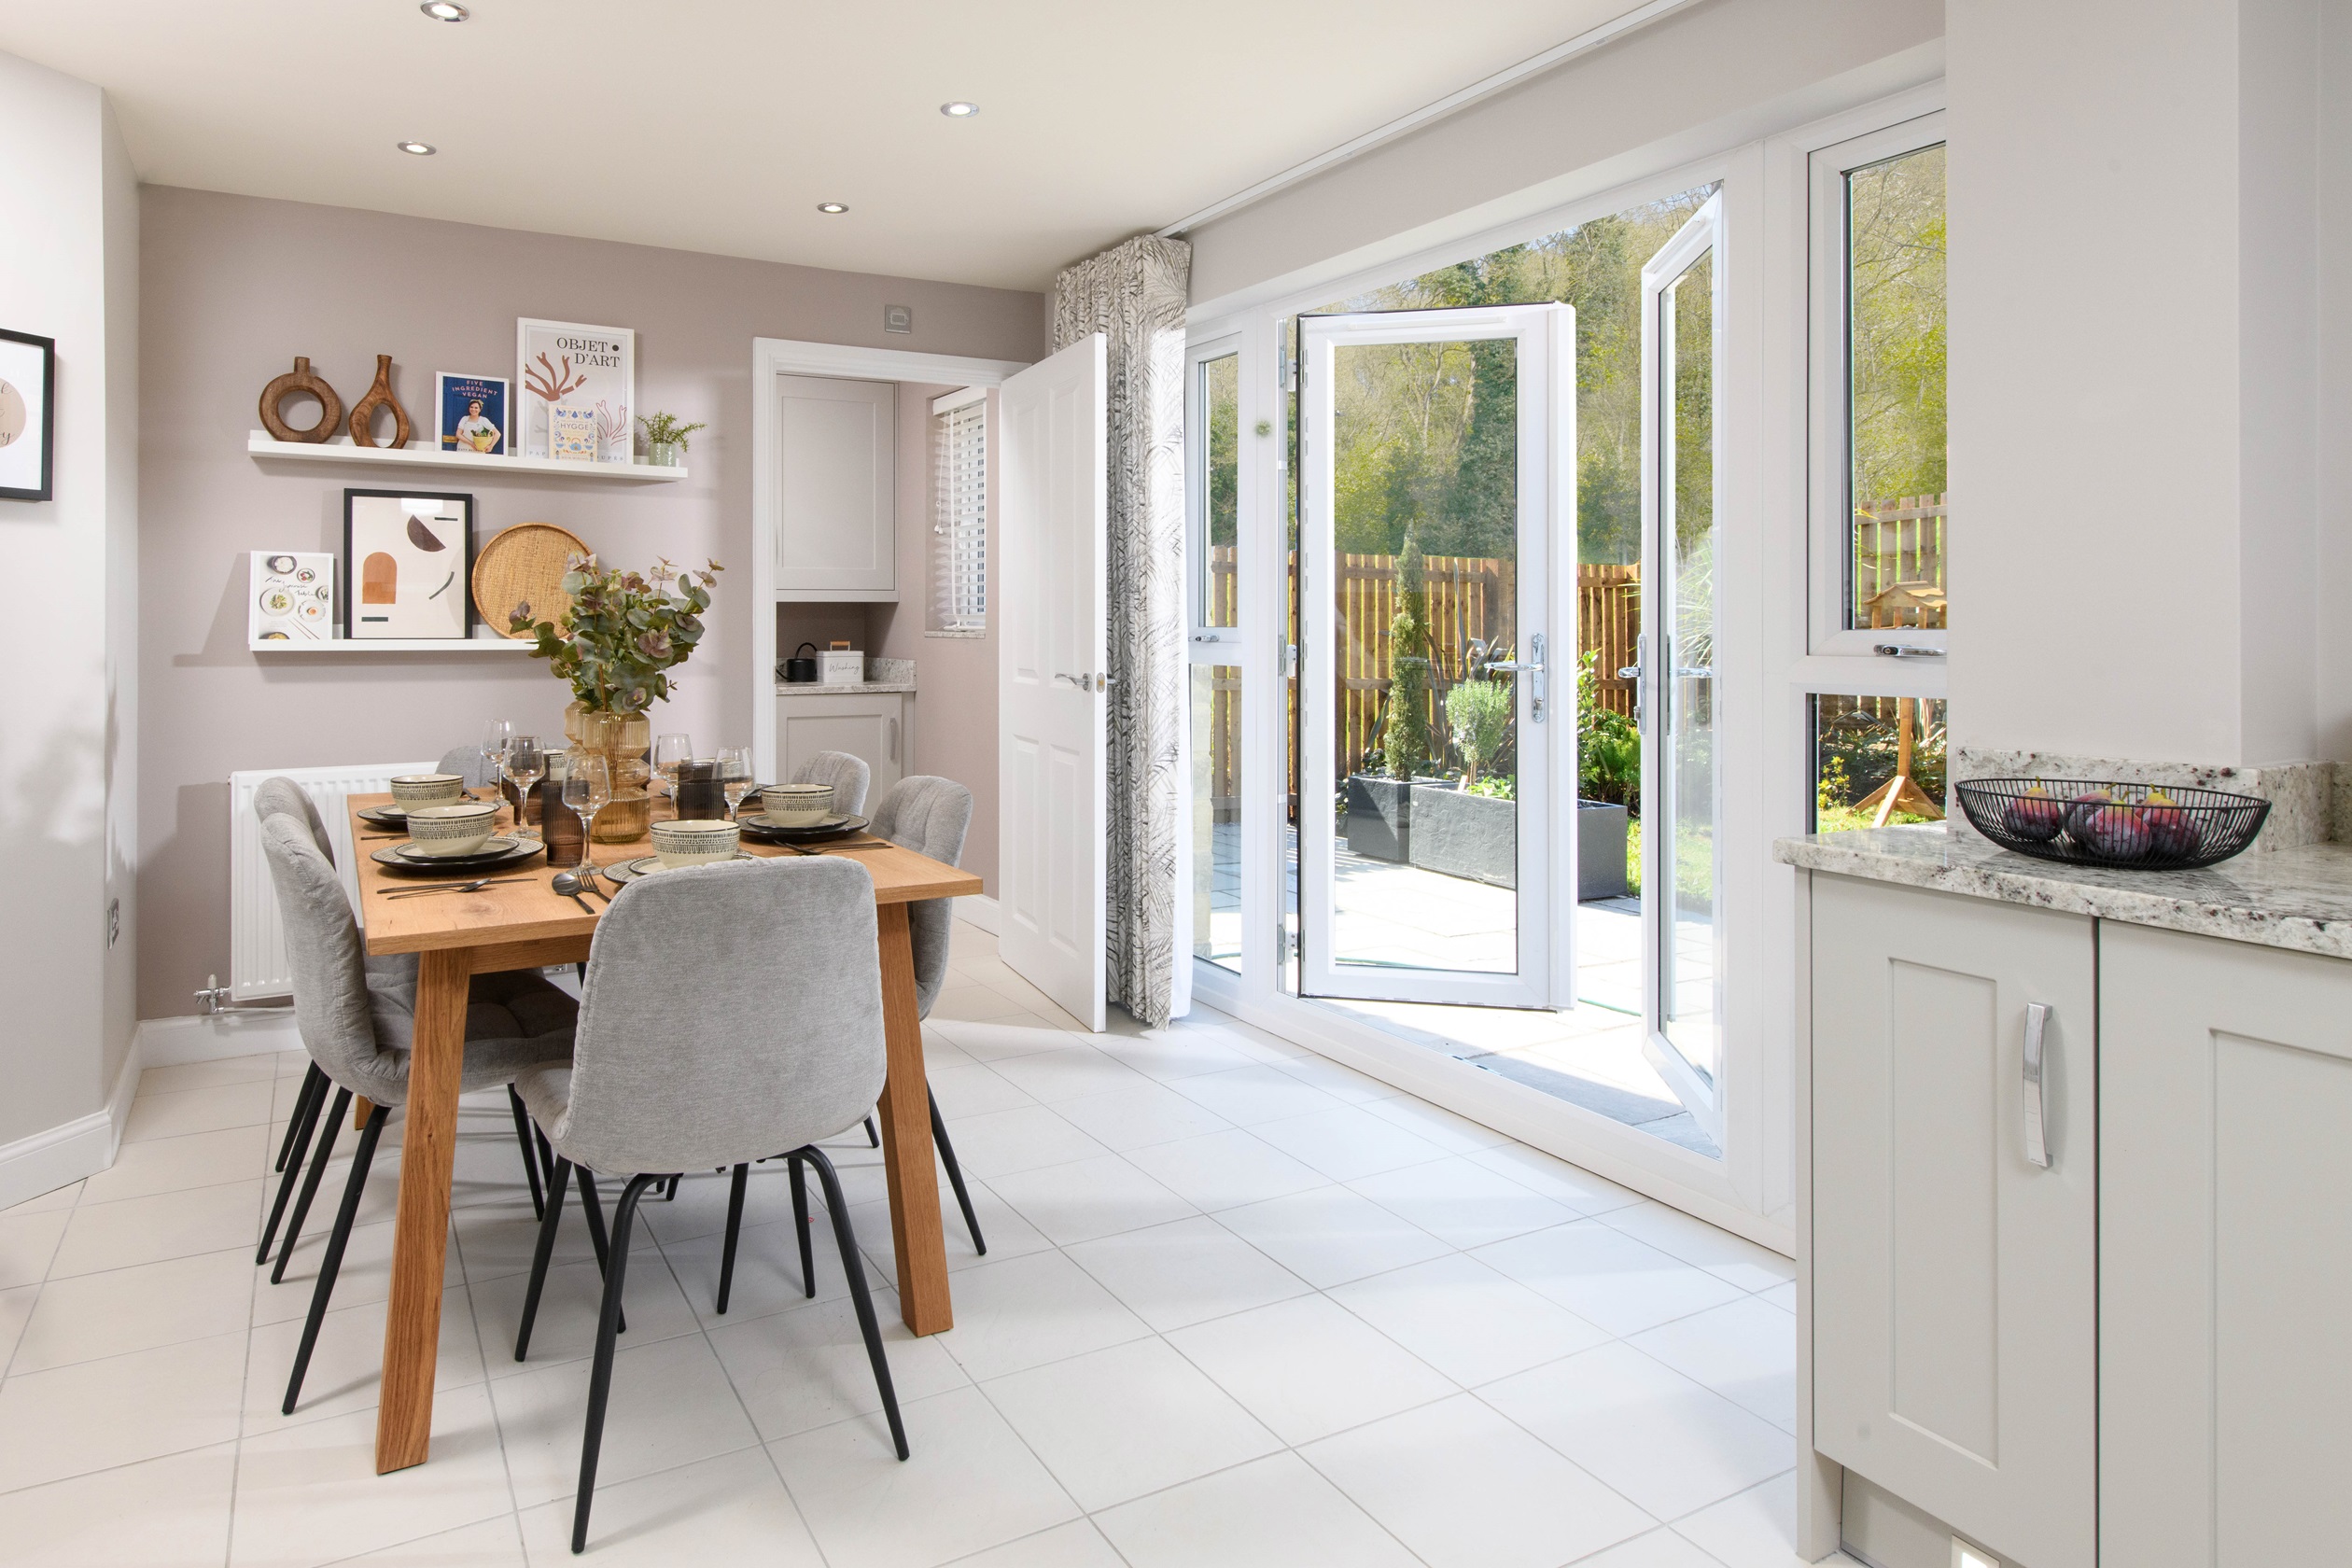 Property 3 of 10. The Mews Windermere Dining Kitchen